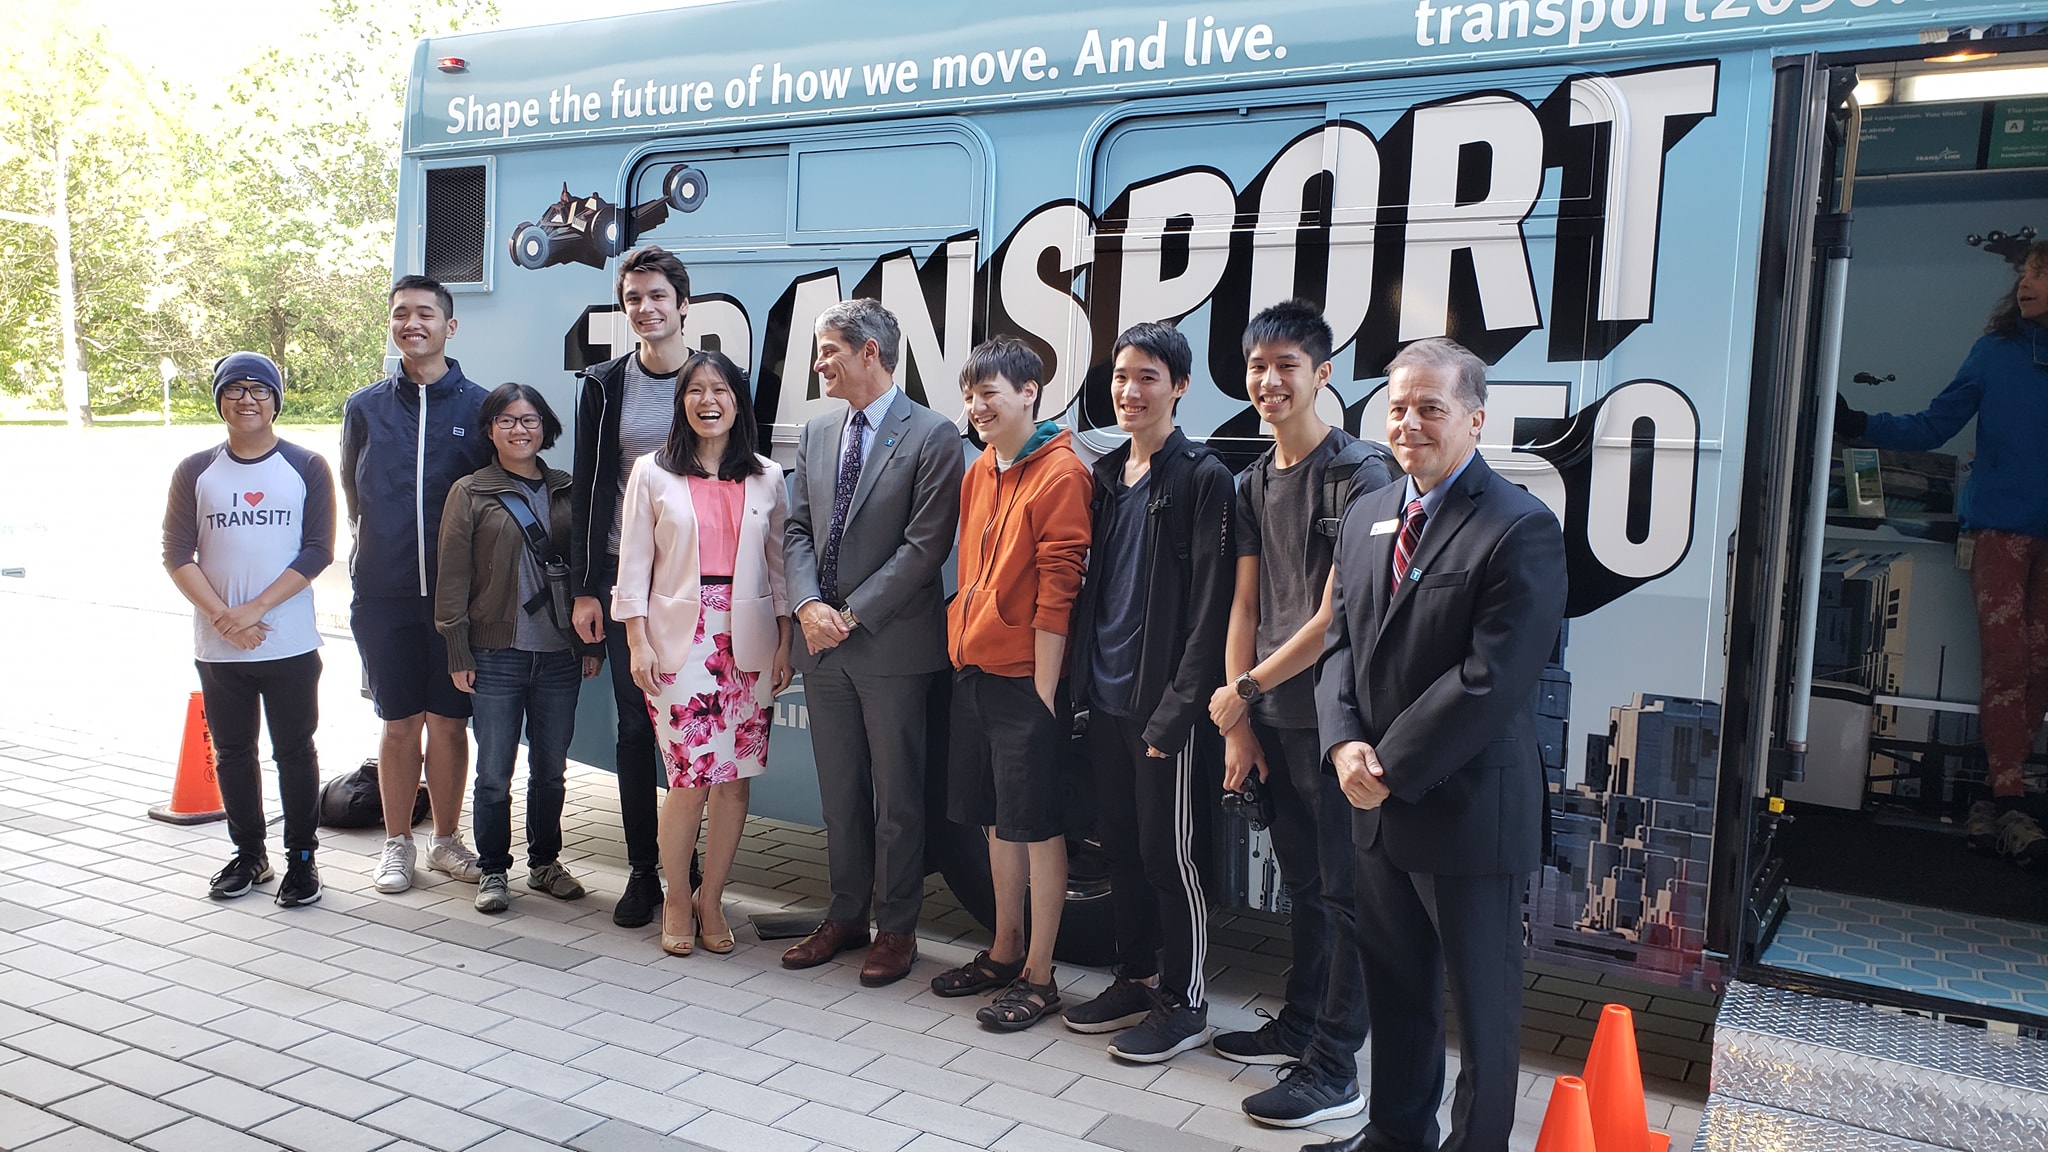 ALT: ELMTOT members with Bowinn Ma, ____ and ____ poses behind the Transport 2050 shuttle.